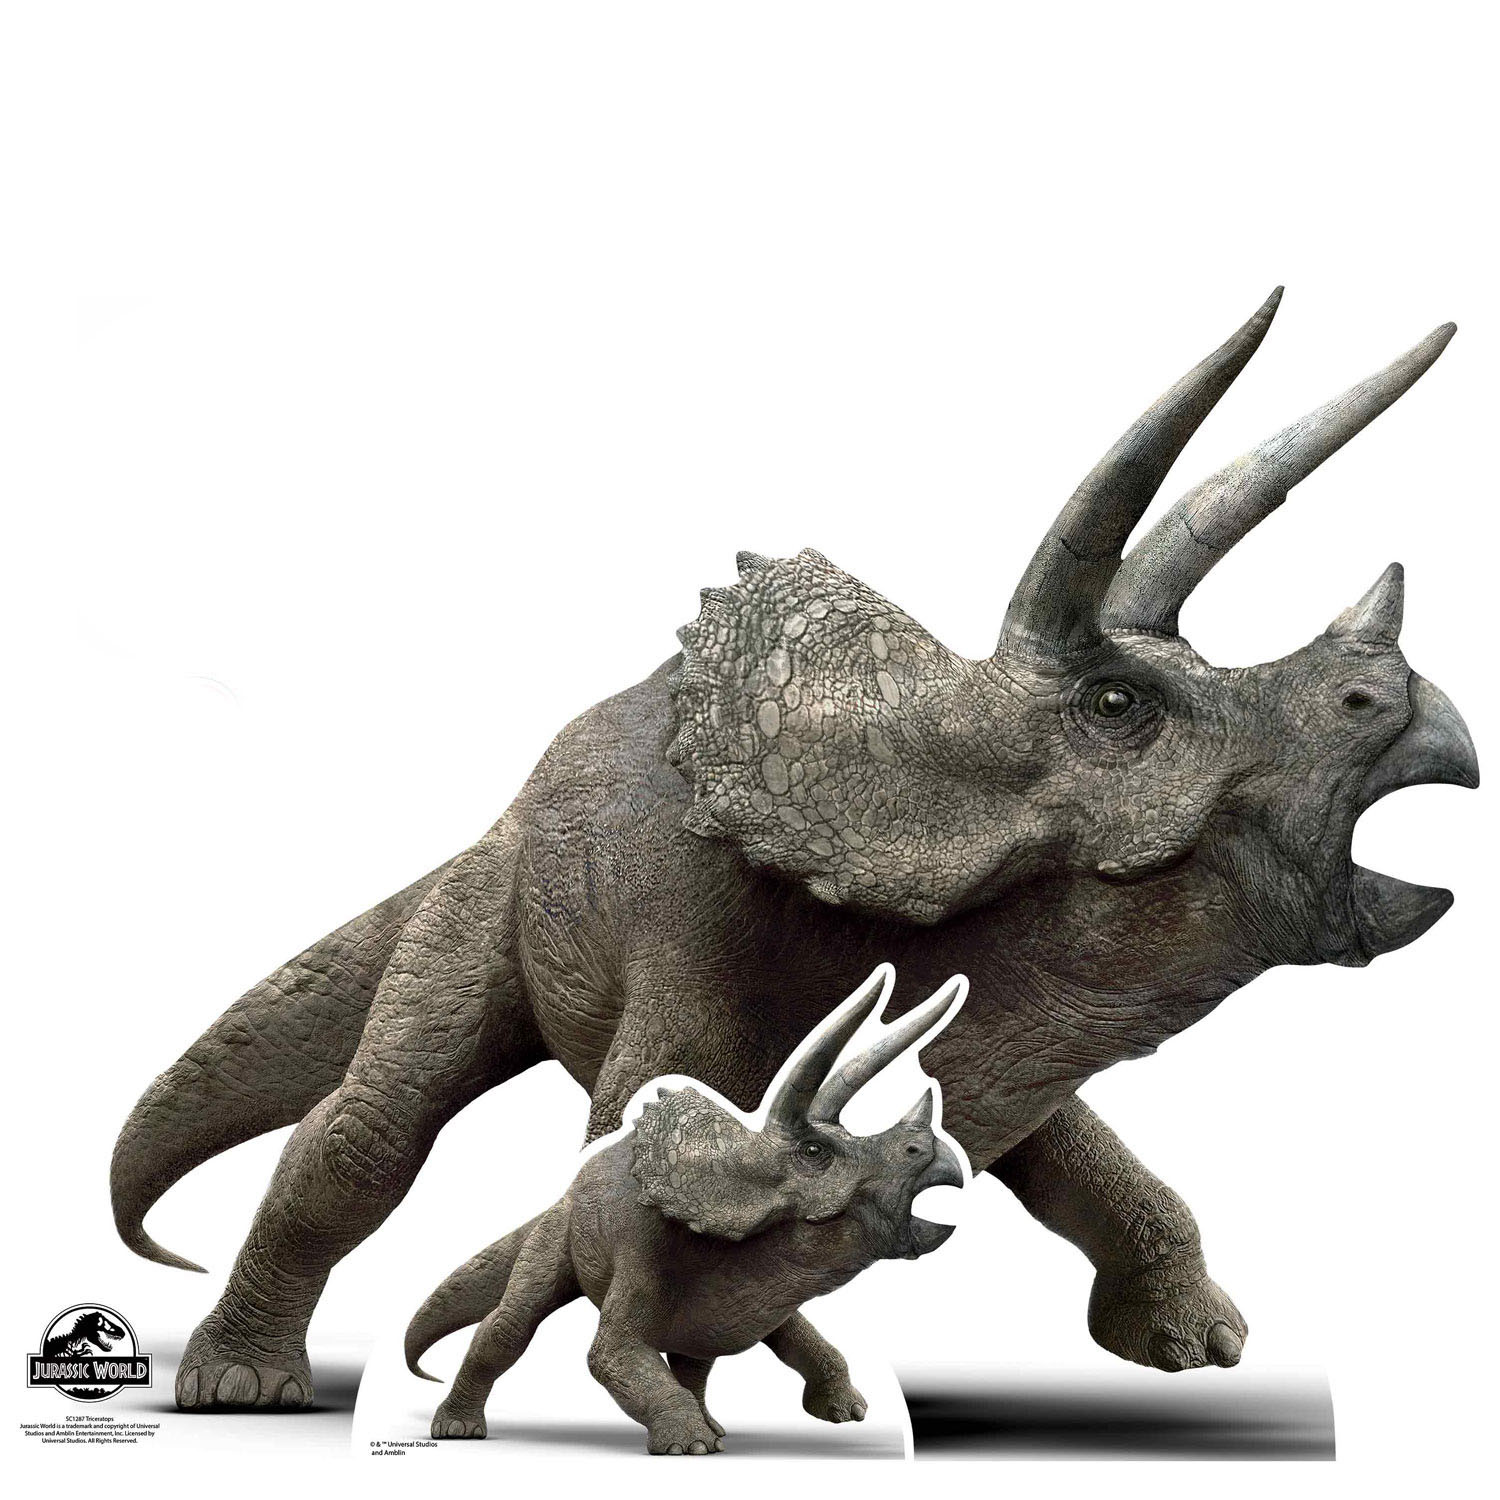 Give Kids the World Loans Trixie the Triceratops Figure to Universal  Studios Florida to Celebrate 'Jurassic Park' - WDW News Today